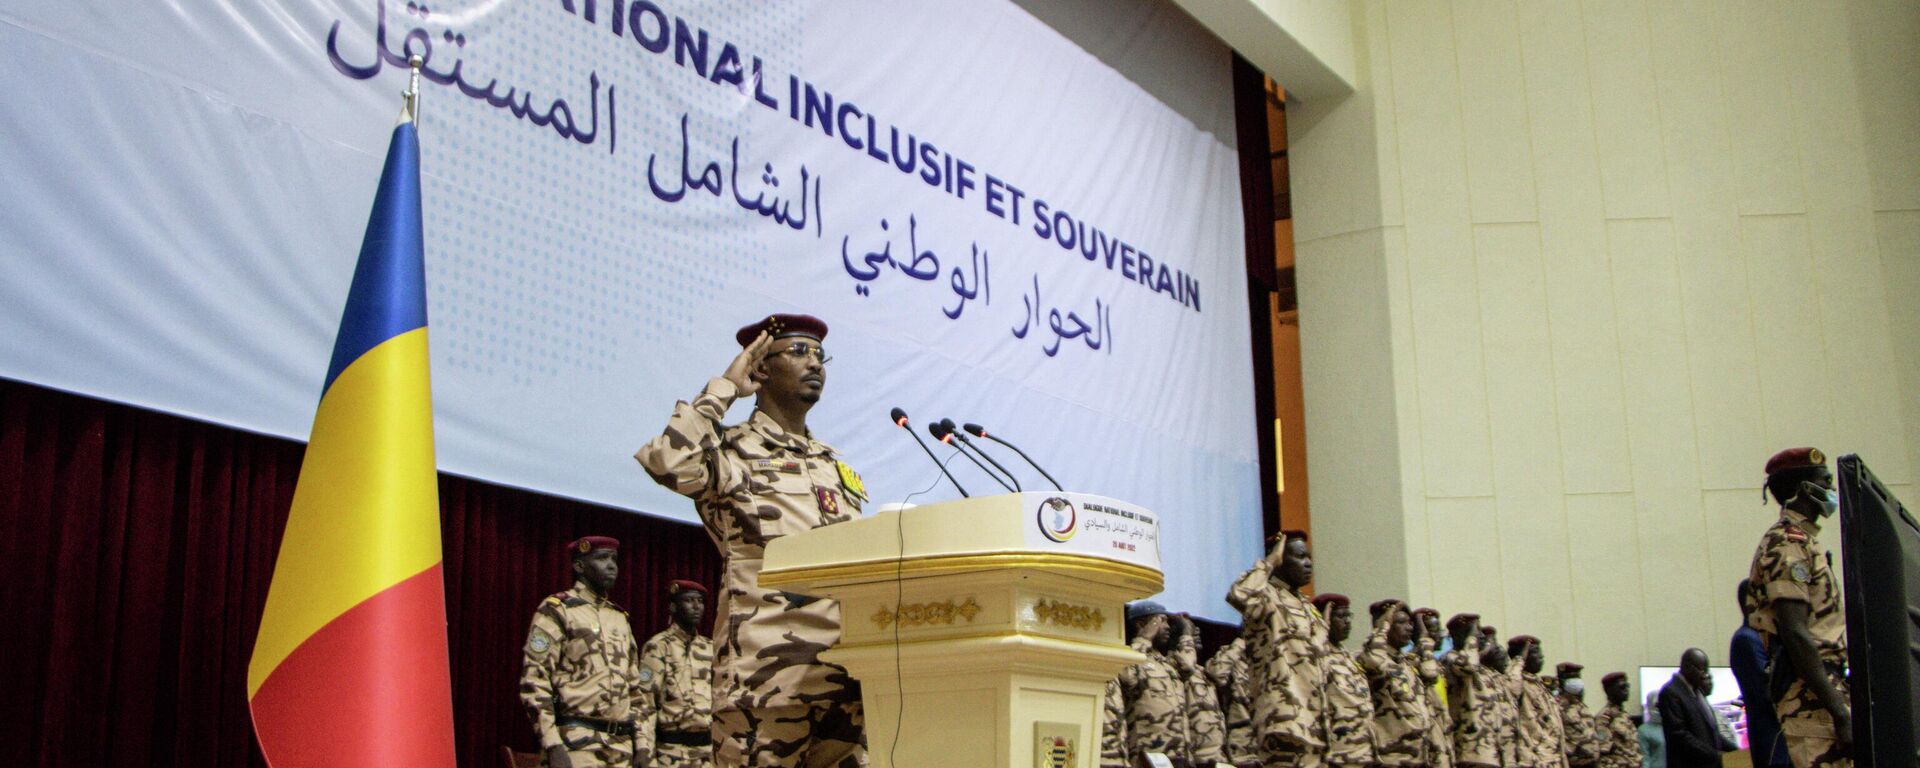 Transition President Mahamat Idriss Deby Itno gestures during the opening ceremony of the national dialogue at the January 15 Palace in N'Djamena, on August 20, 2022 - Sputnik International, 1920, 24.08.2022